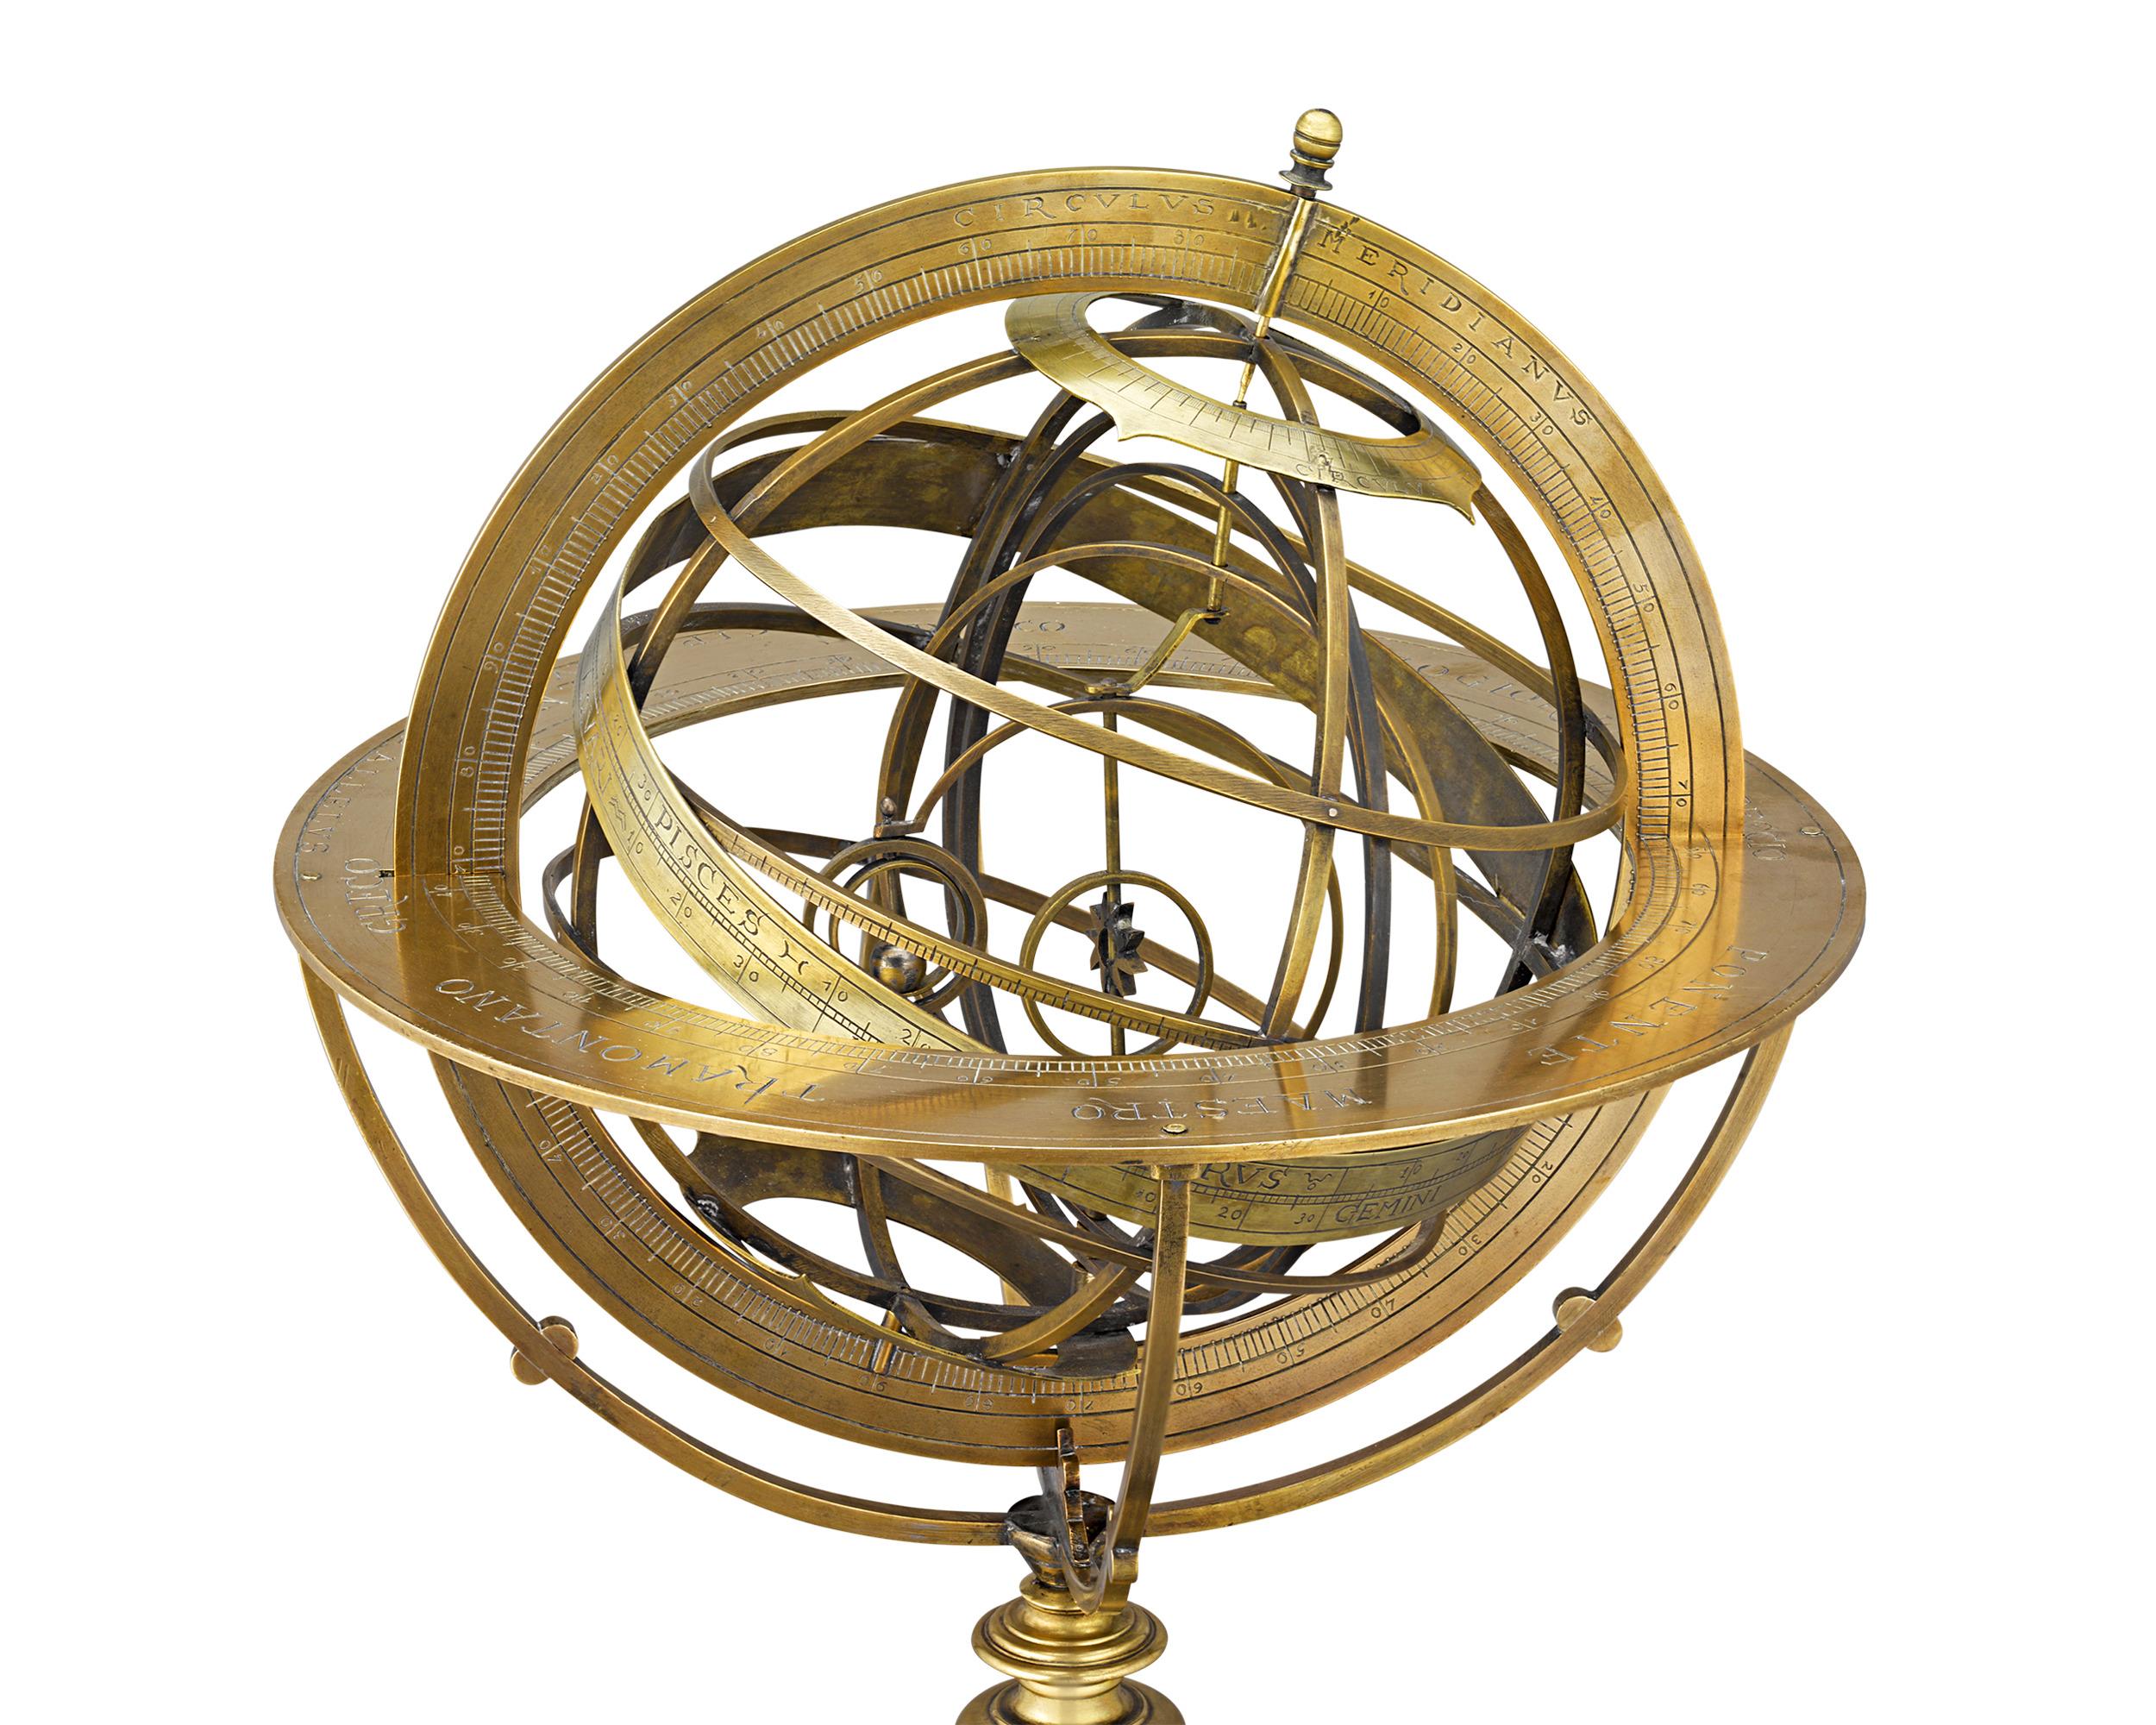 This exceptional Italian brass armillary sphere dates to the 17th century - exceedingly rare for an armillary sphere of this size. Though other armillary spheres were often constructed based on Ptolemaic theories of a geocentric universe, the